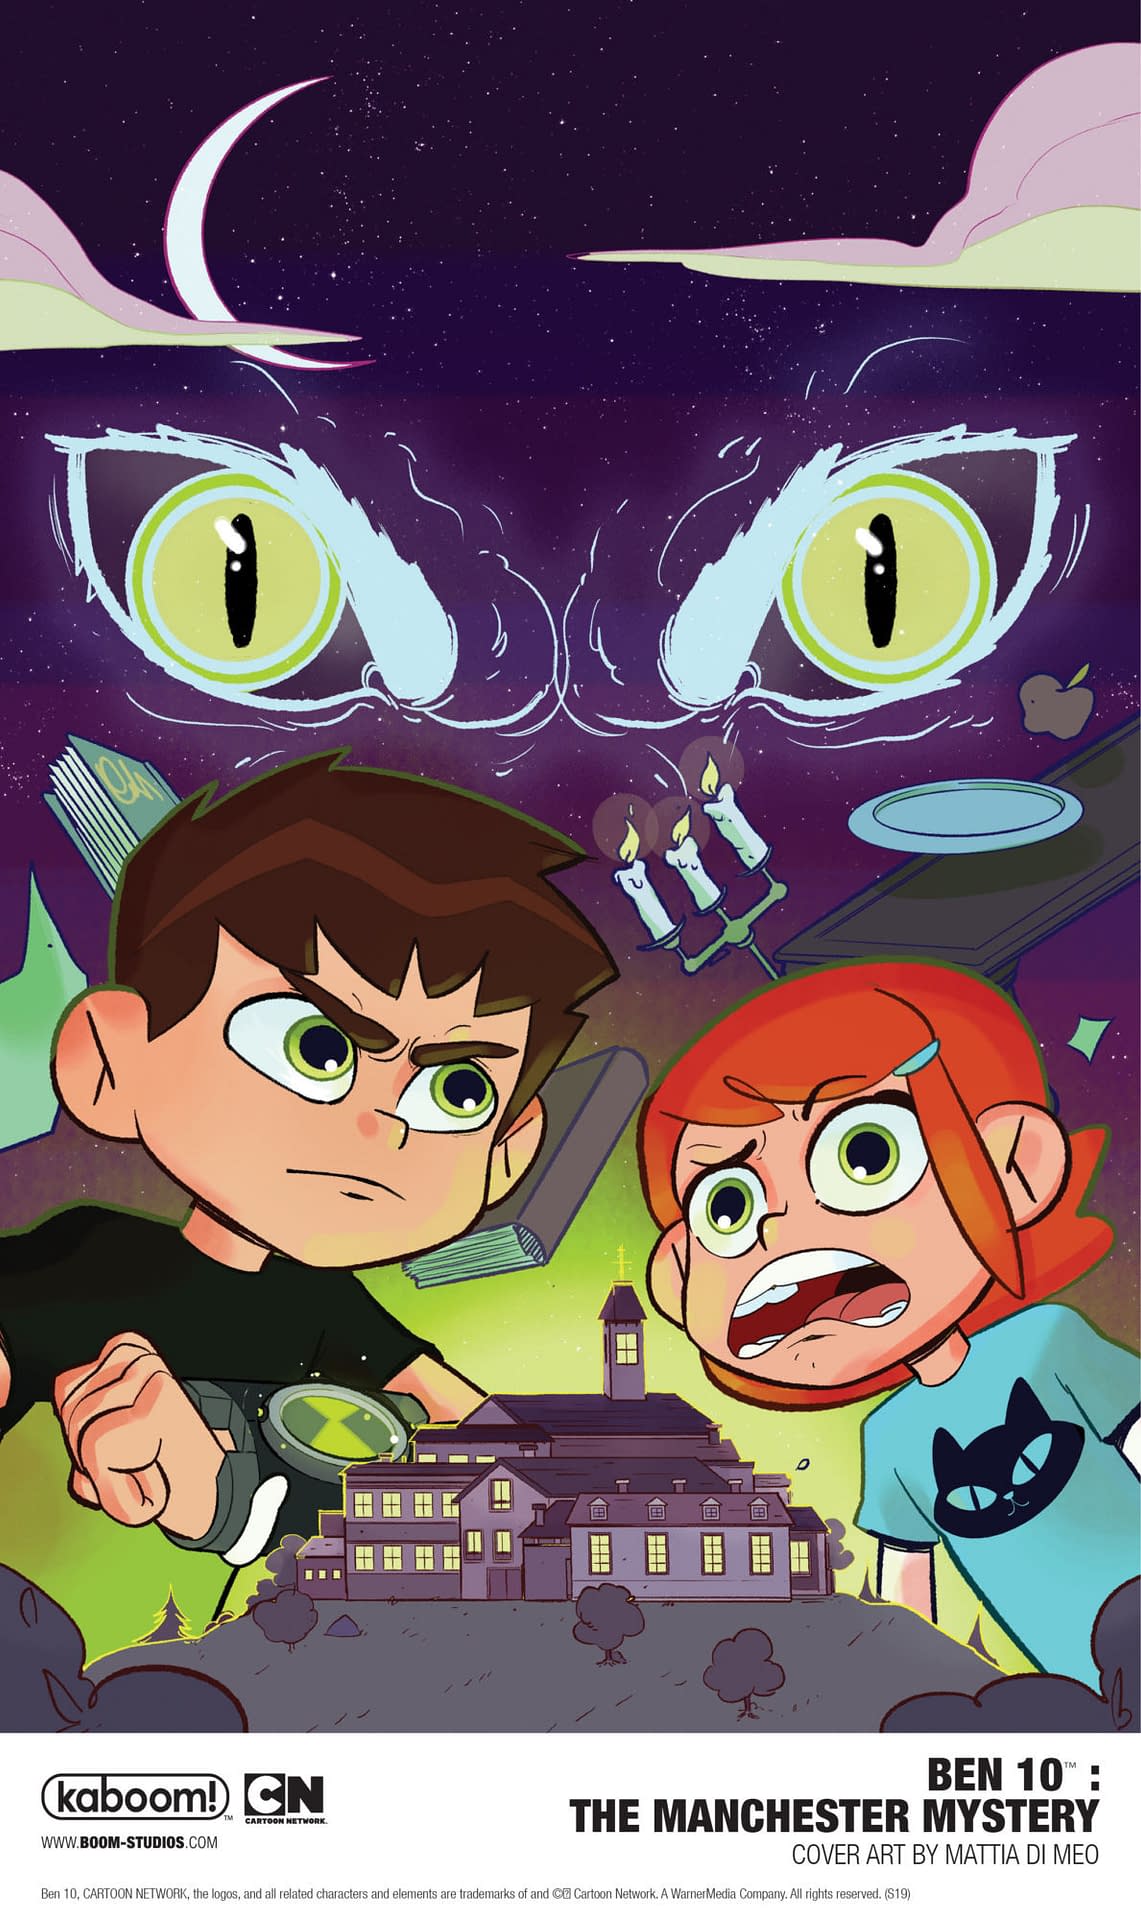 Manchester Mystery: Another Ben 10 OGN for 2020